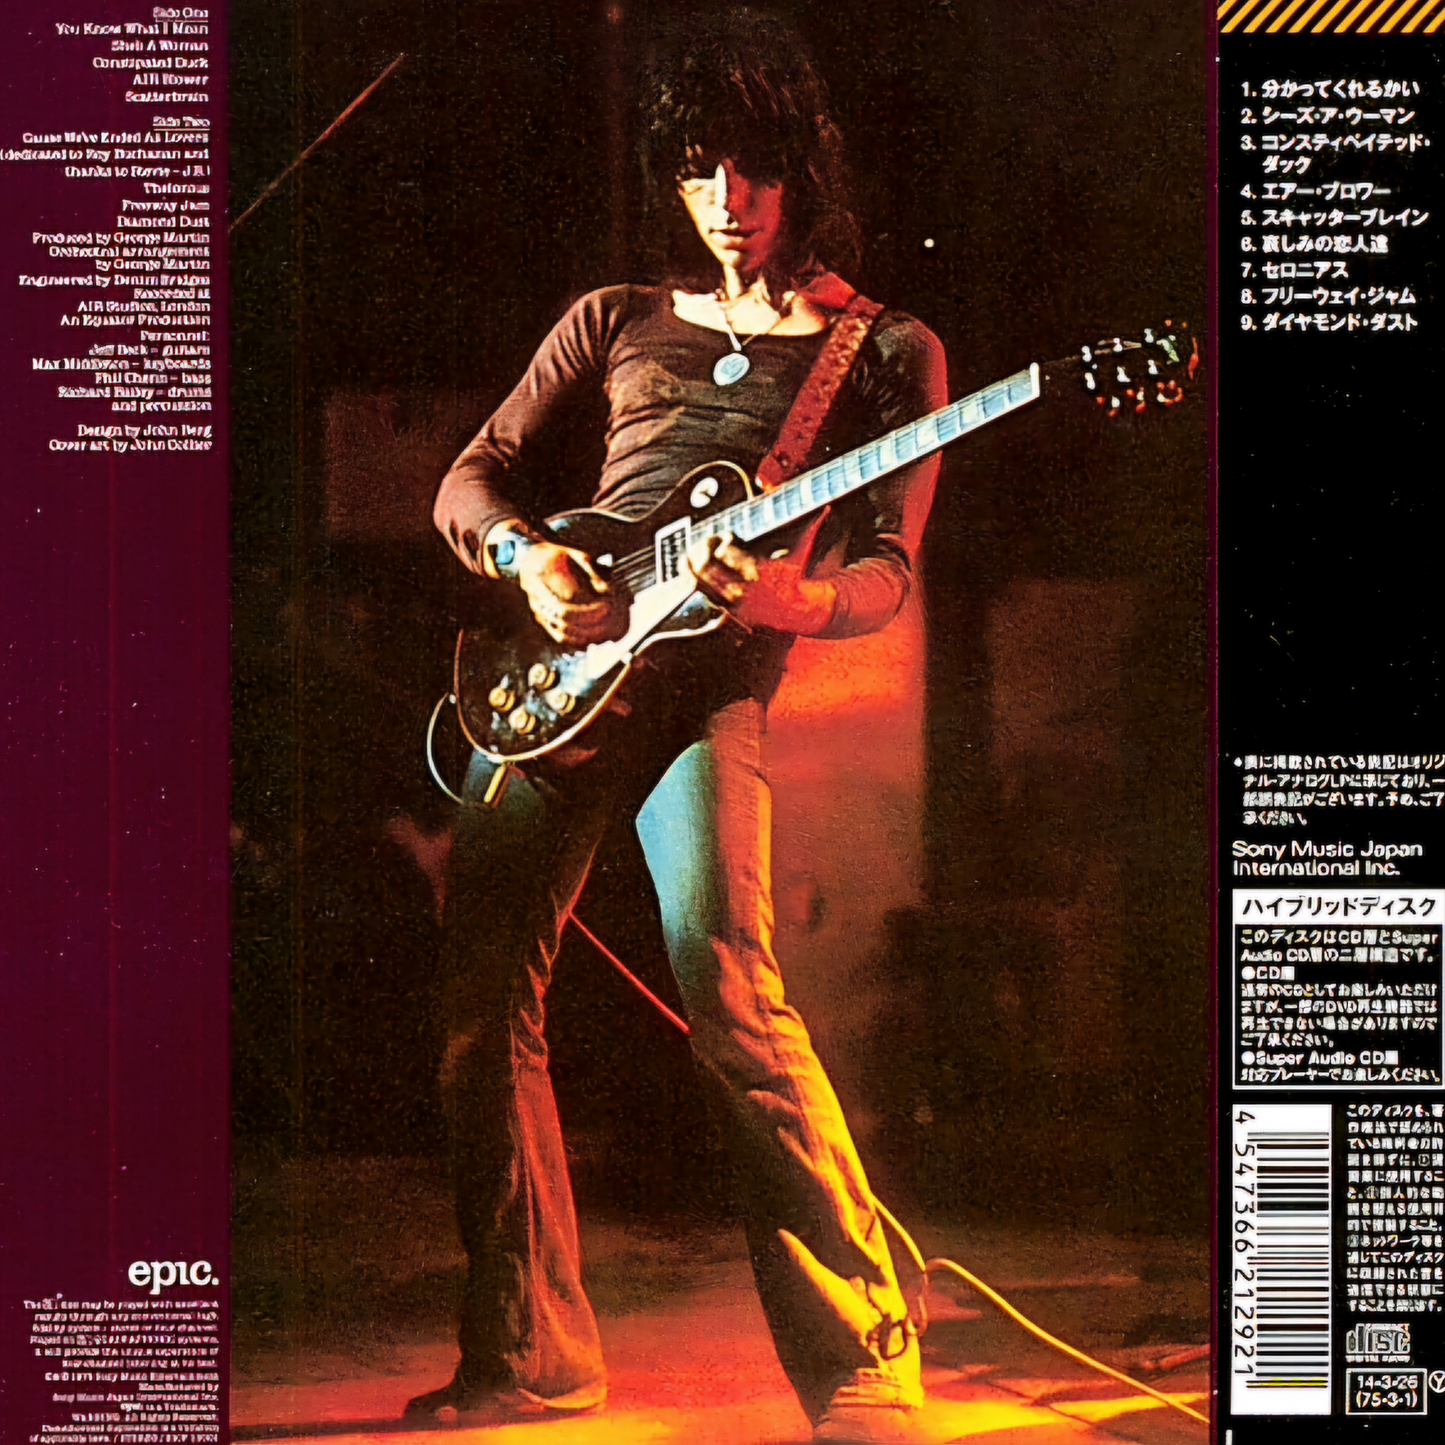 Jeff-Beck_Blow_By_Blow_Japanese_Quad_Hybrid_SACD